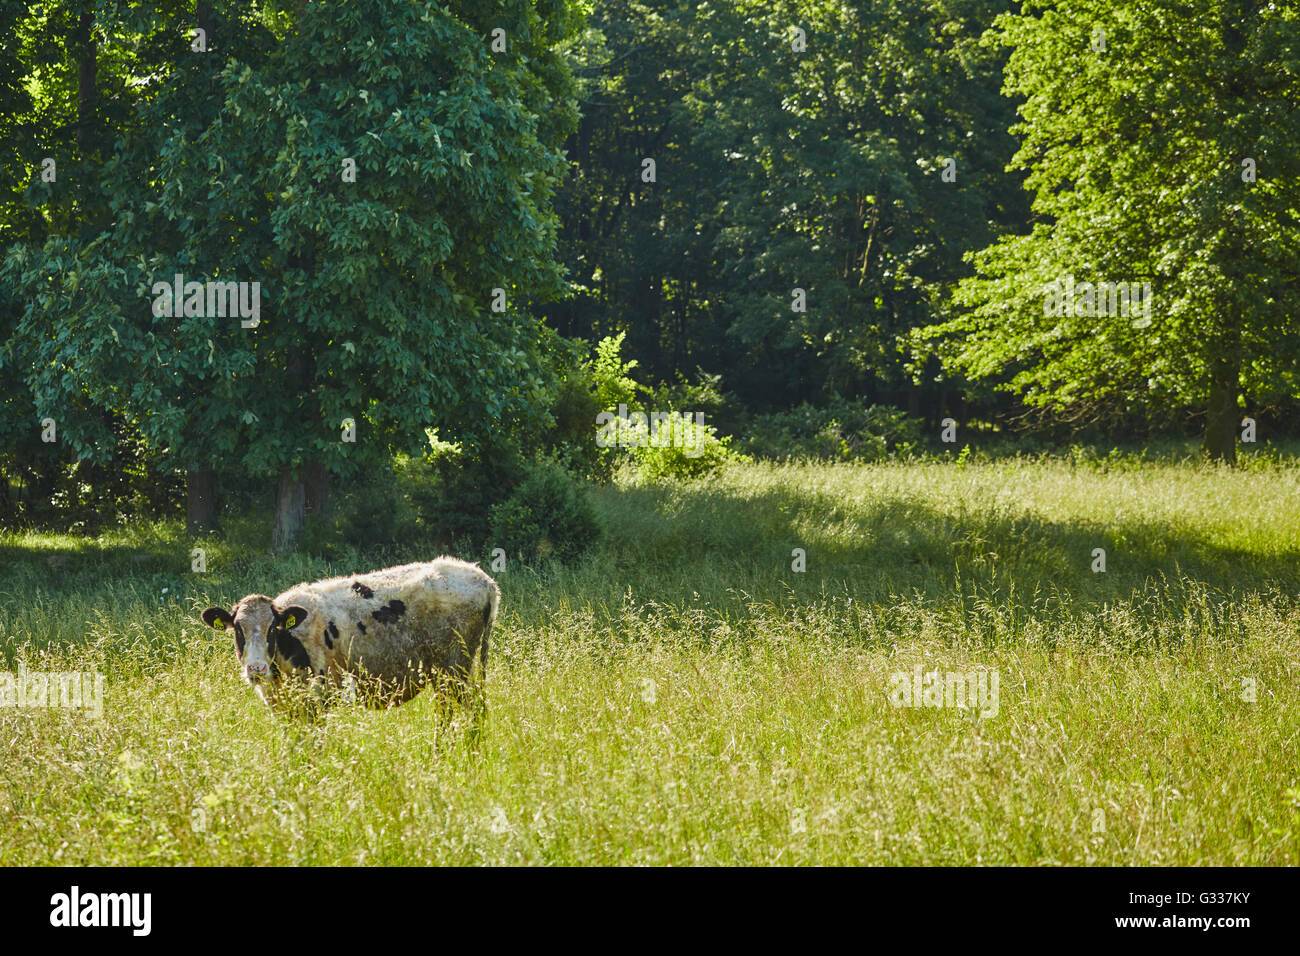 Cows grazing on grass, Amish Country, Bowmansville, Lancaster County, Pennsylvania, USA Stock Photo